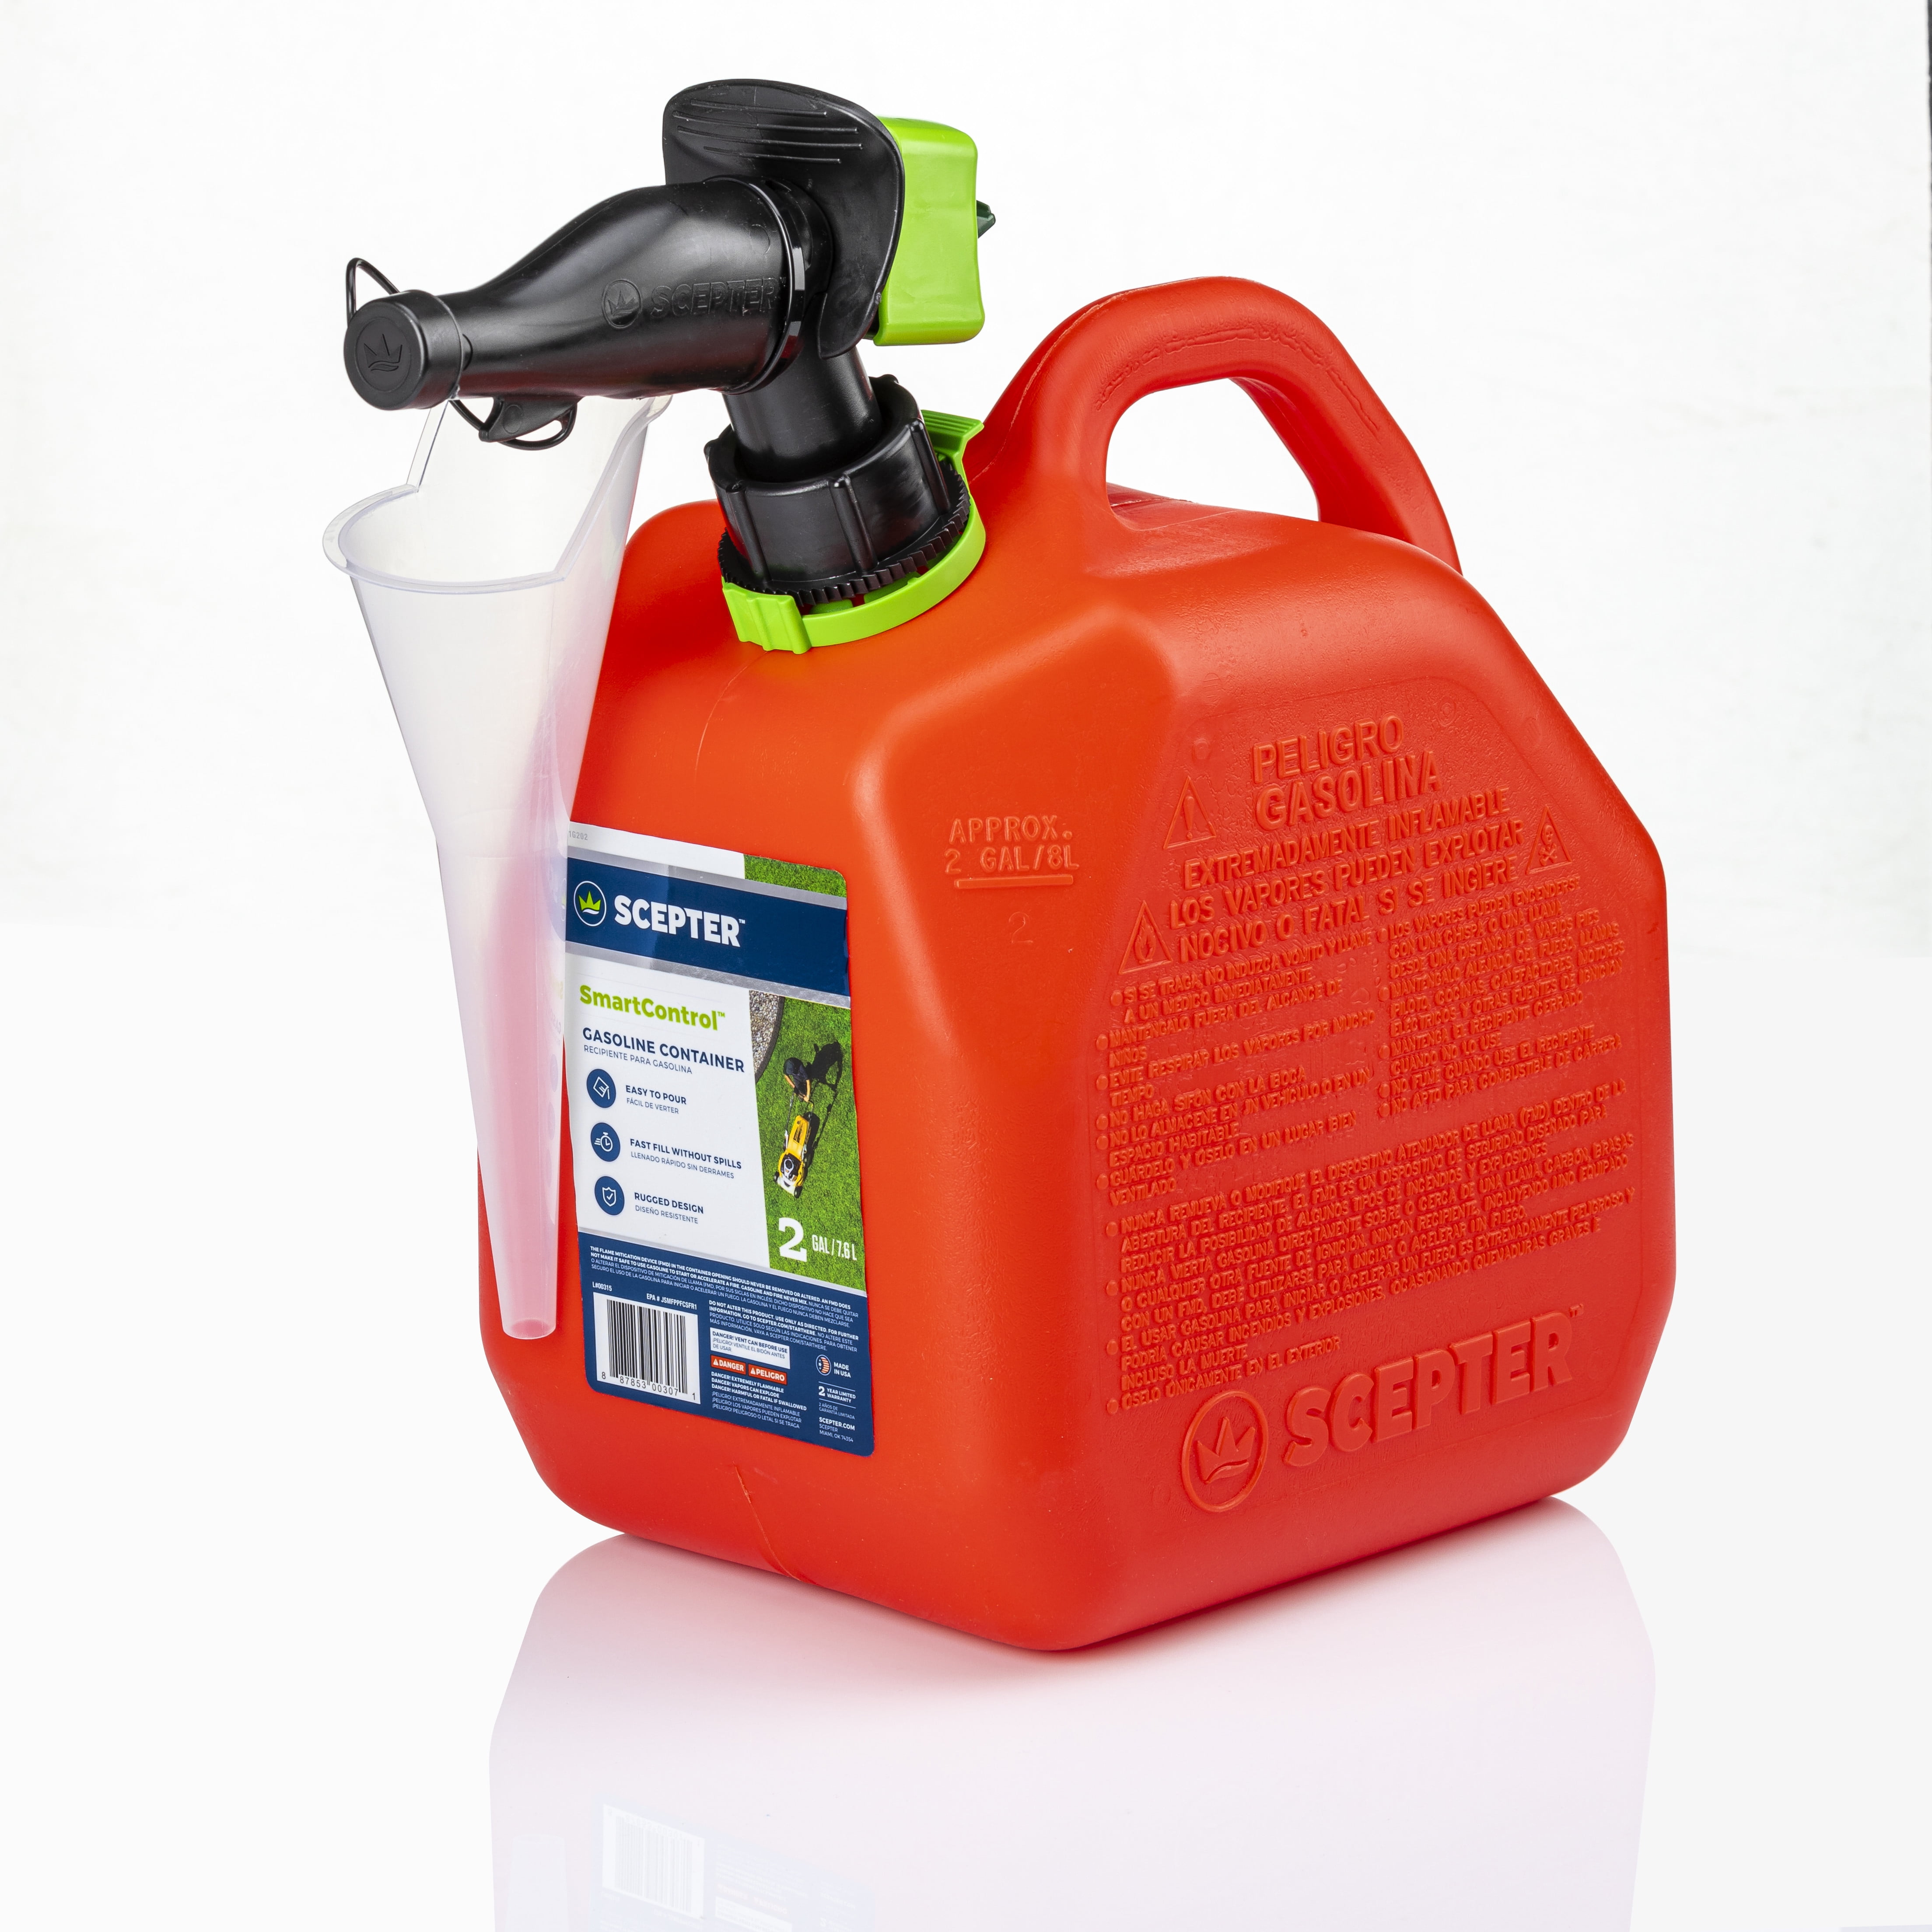 CARB Compliant Gas Can SCEPTER 00003 5 gal 